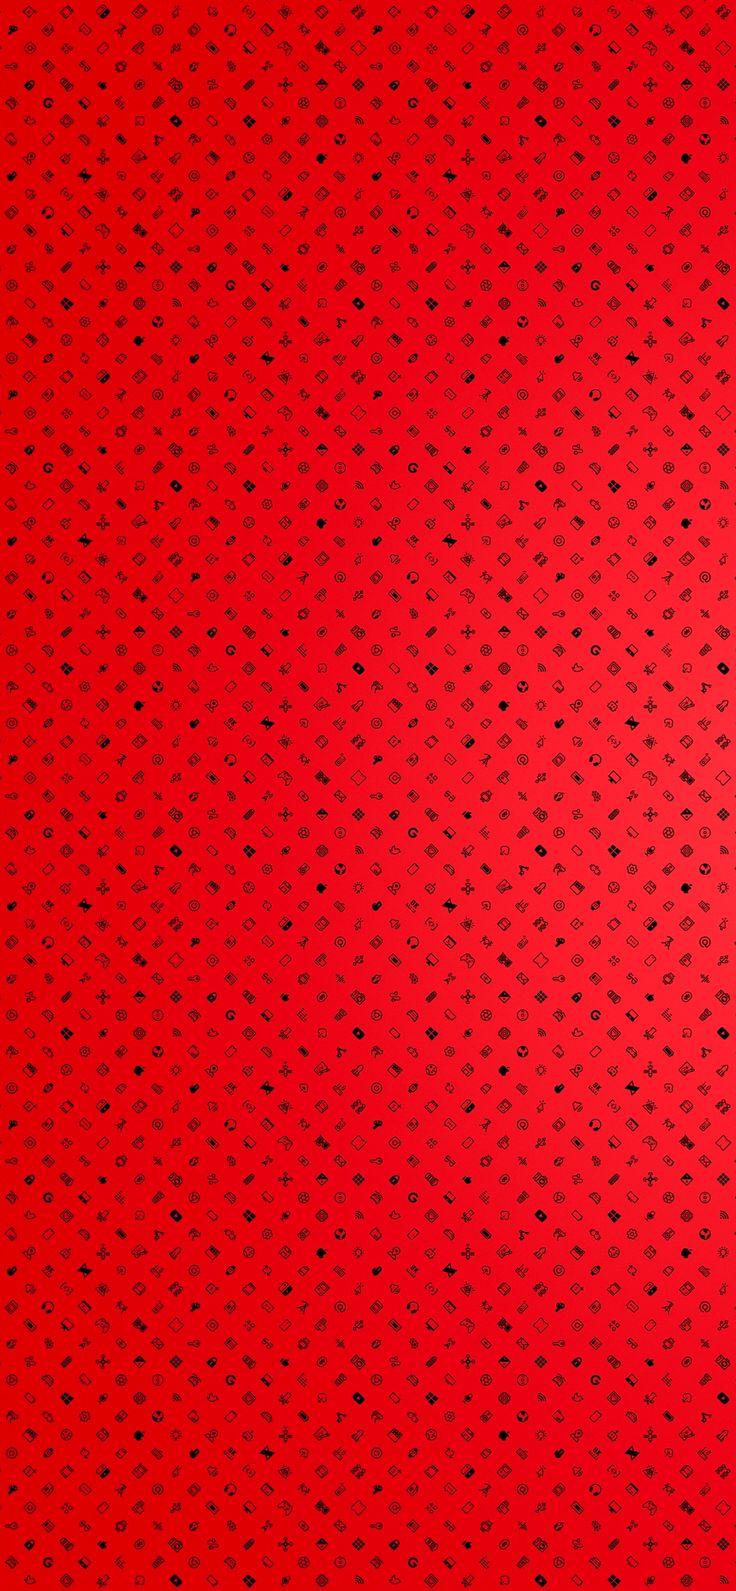 MKBHD Red Cool wallpapers red Red wallpaper Iphone wallpaper